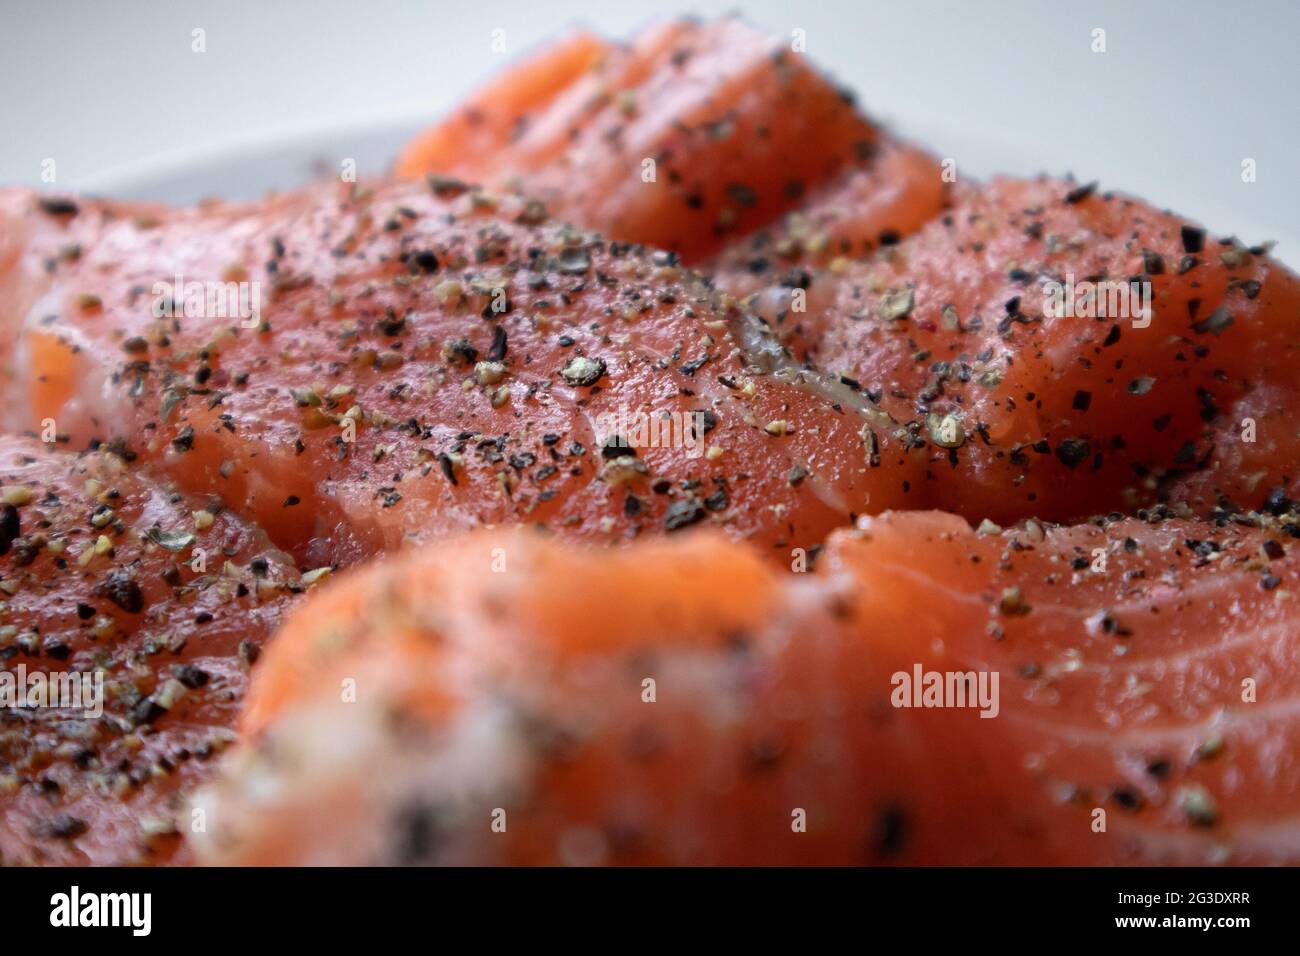 Appetizing pieces of fresh raw salmon with spices lying on a white plate Stock Photo